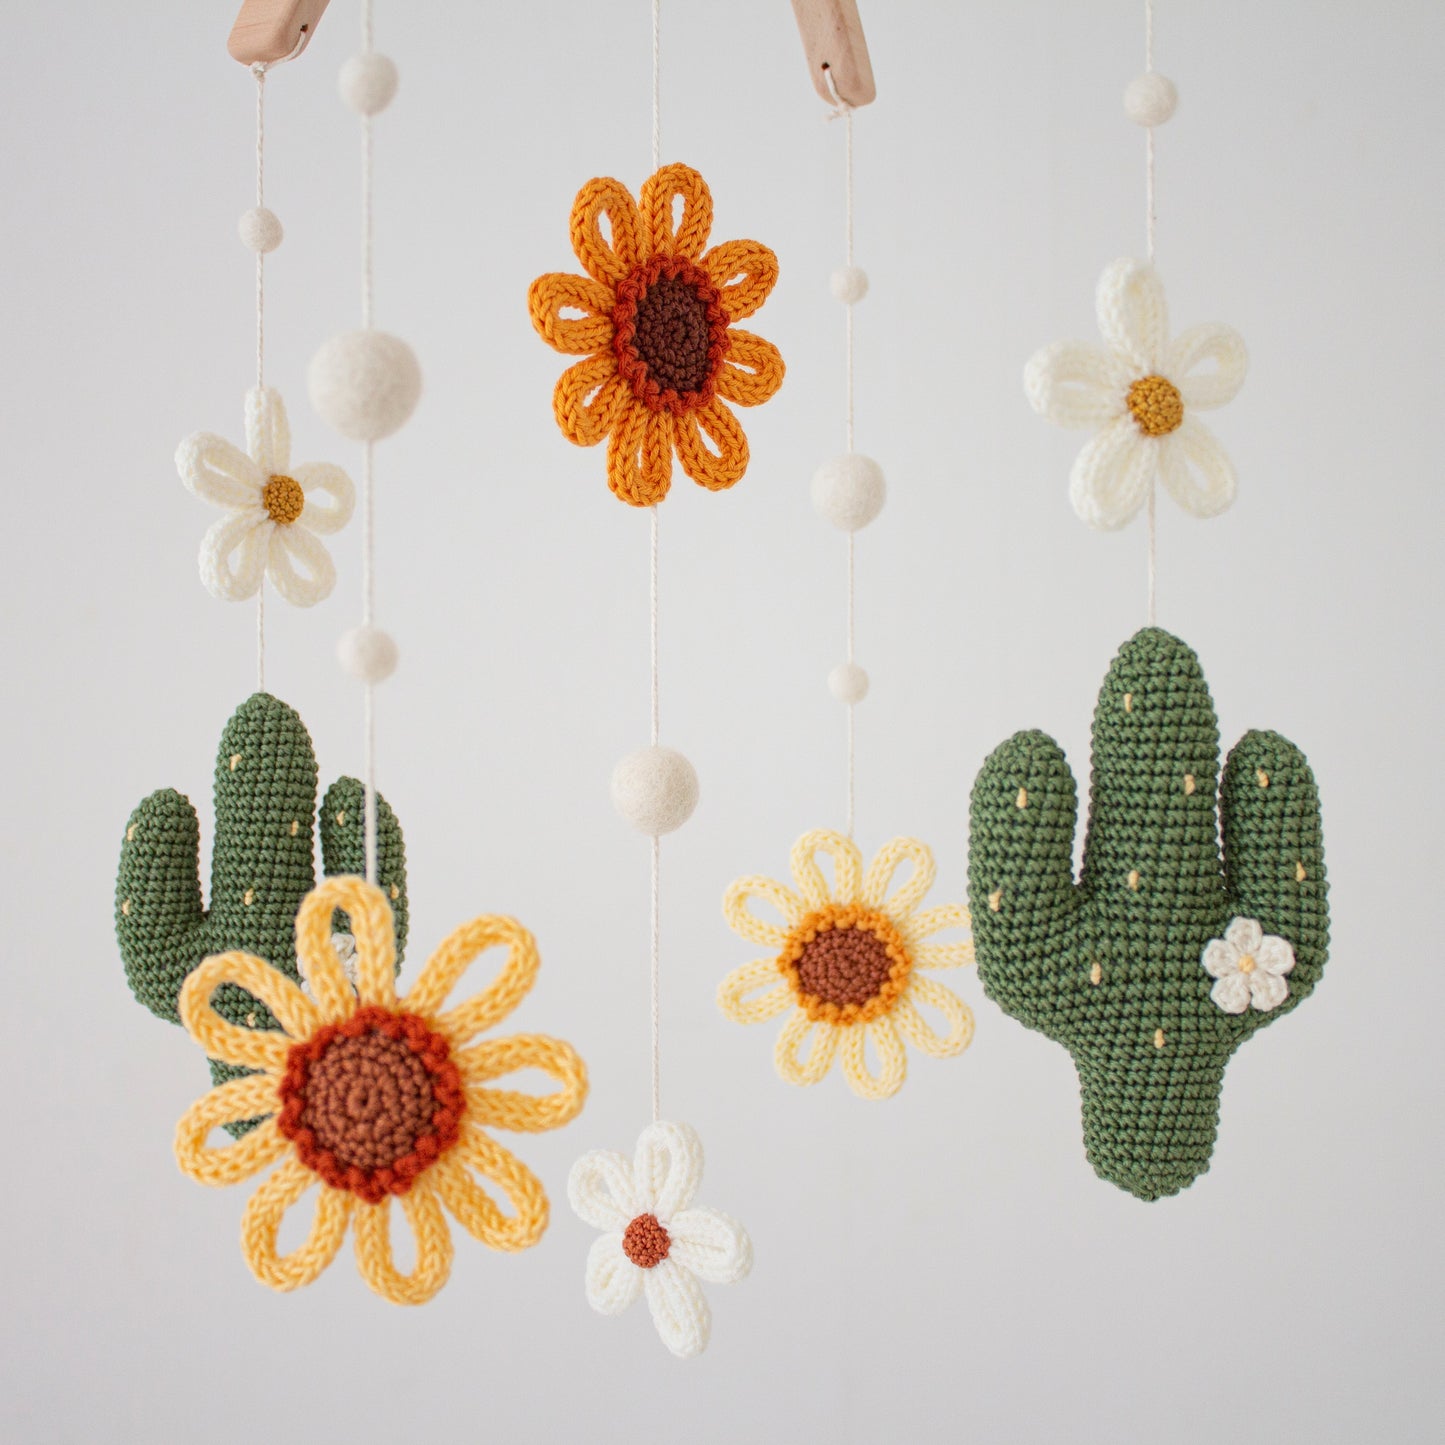 Rustic Sunflowers, Daisies and Cactus nursery mobile